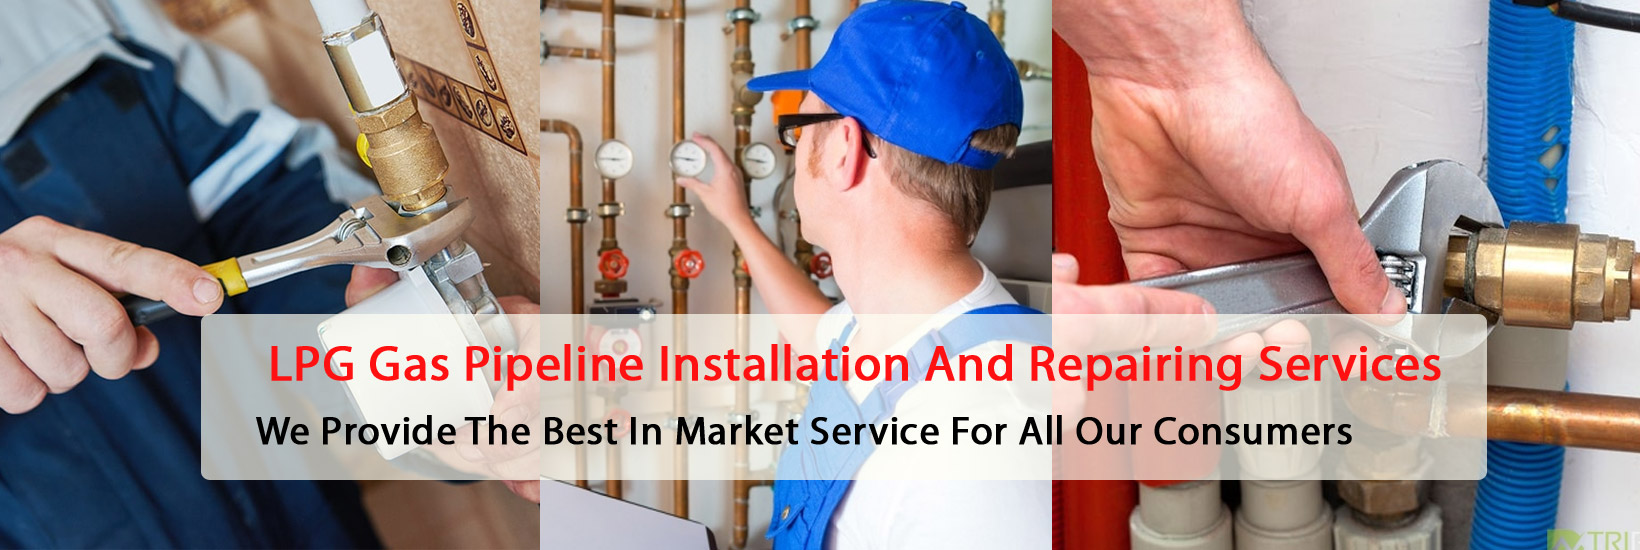 Gas Pipeline Services, Gas Pipeline, Gas Equipment Dealers, Commercial Gas Pipe Line Installation Services, Piped Natural Gas Connection, LPG Gas Pipe Line Installation Services For Domestic